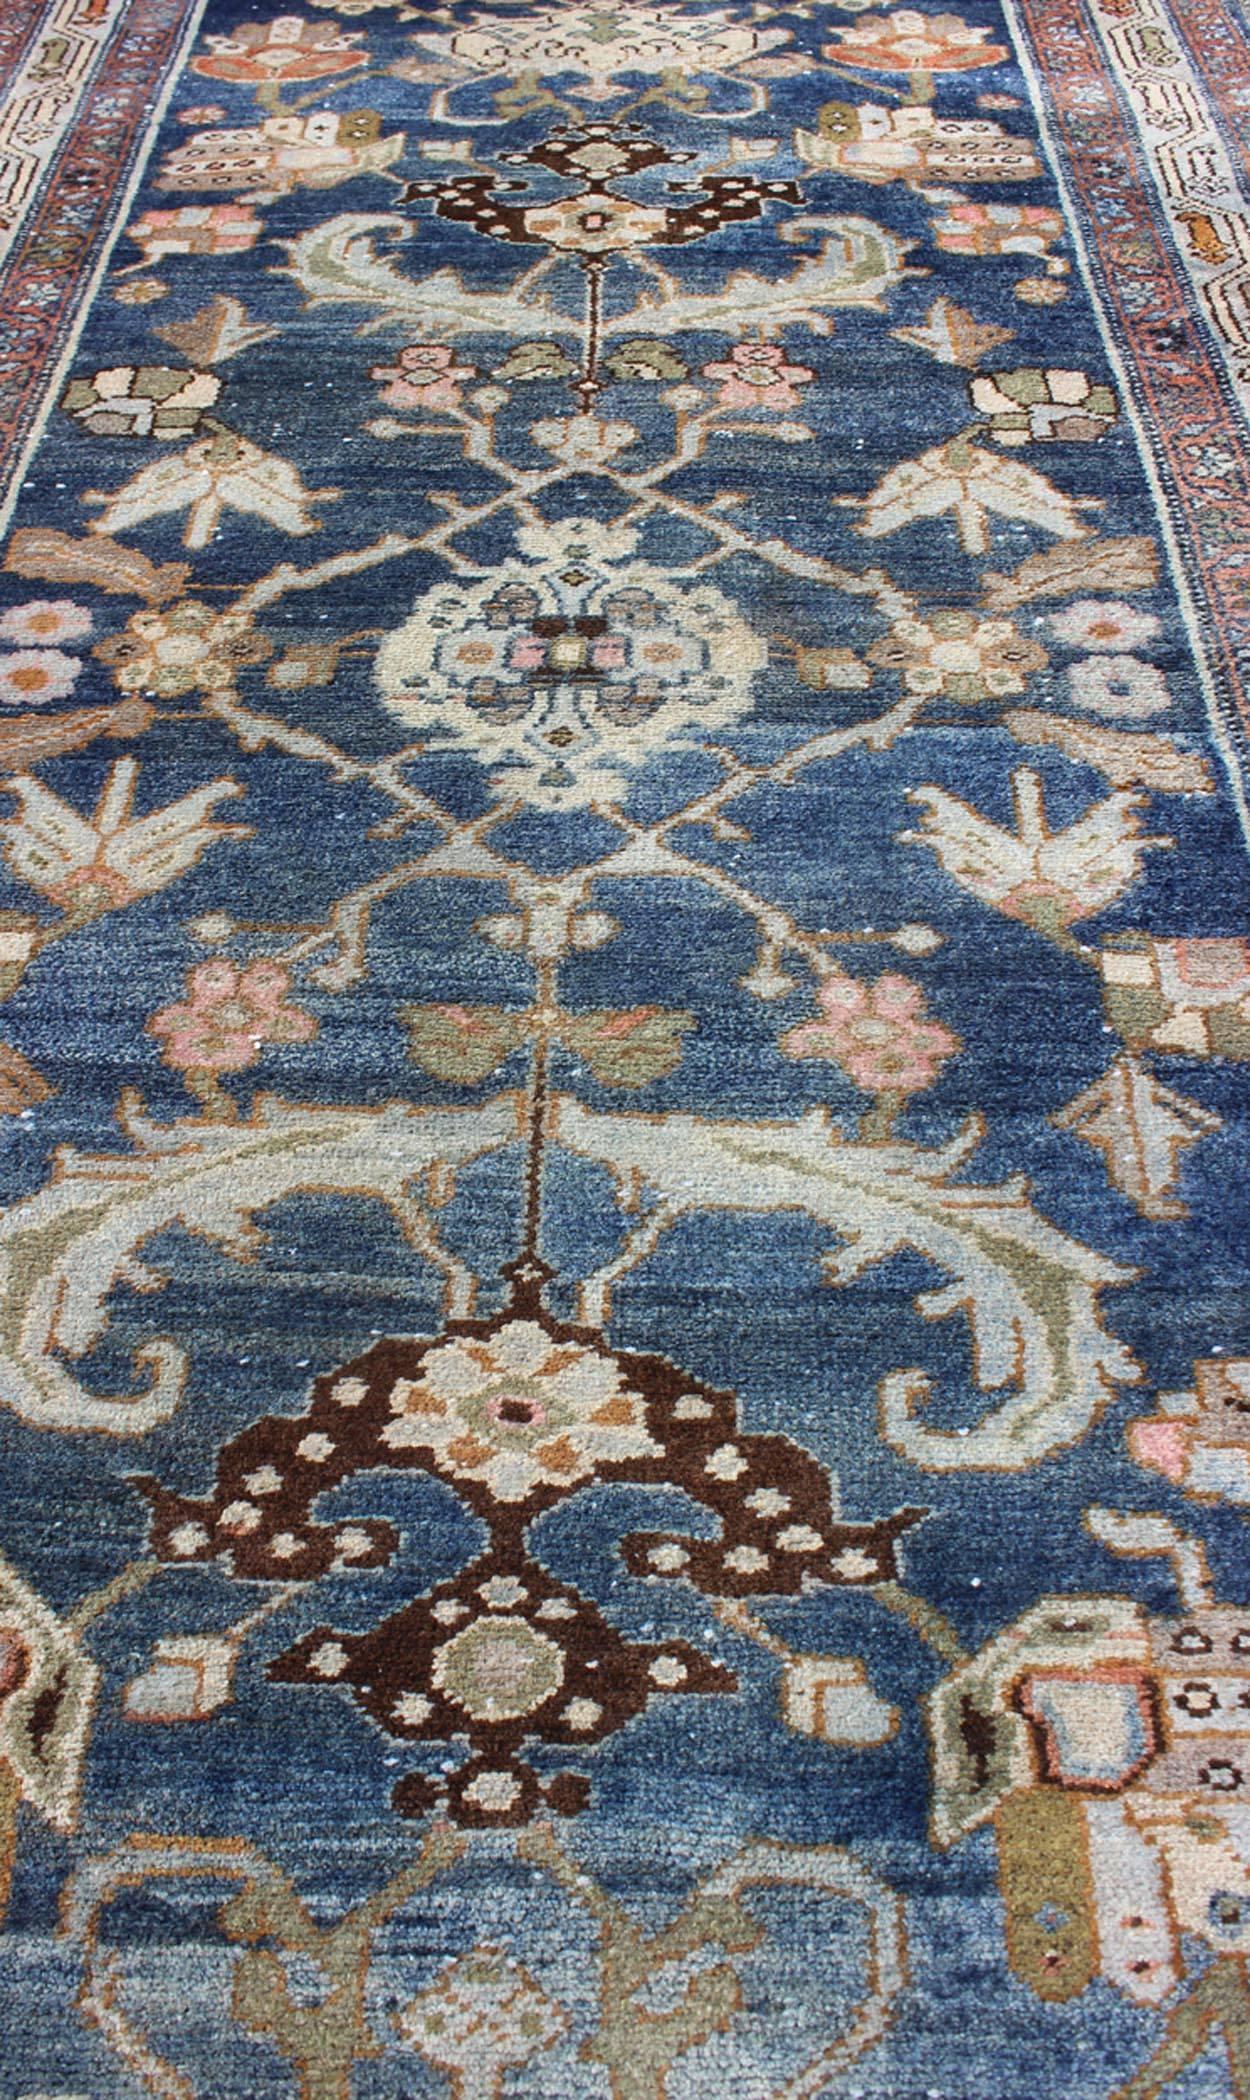 Hand-Knotted Antique Persian Hamedan Rug with Dark Blue Field and Stylized Floral Design